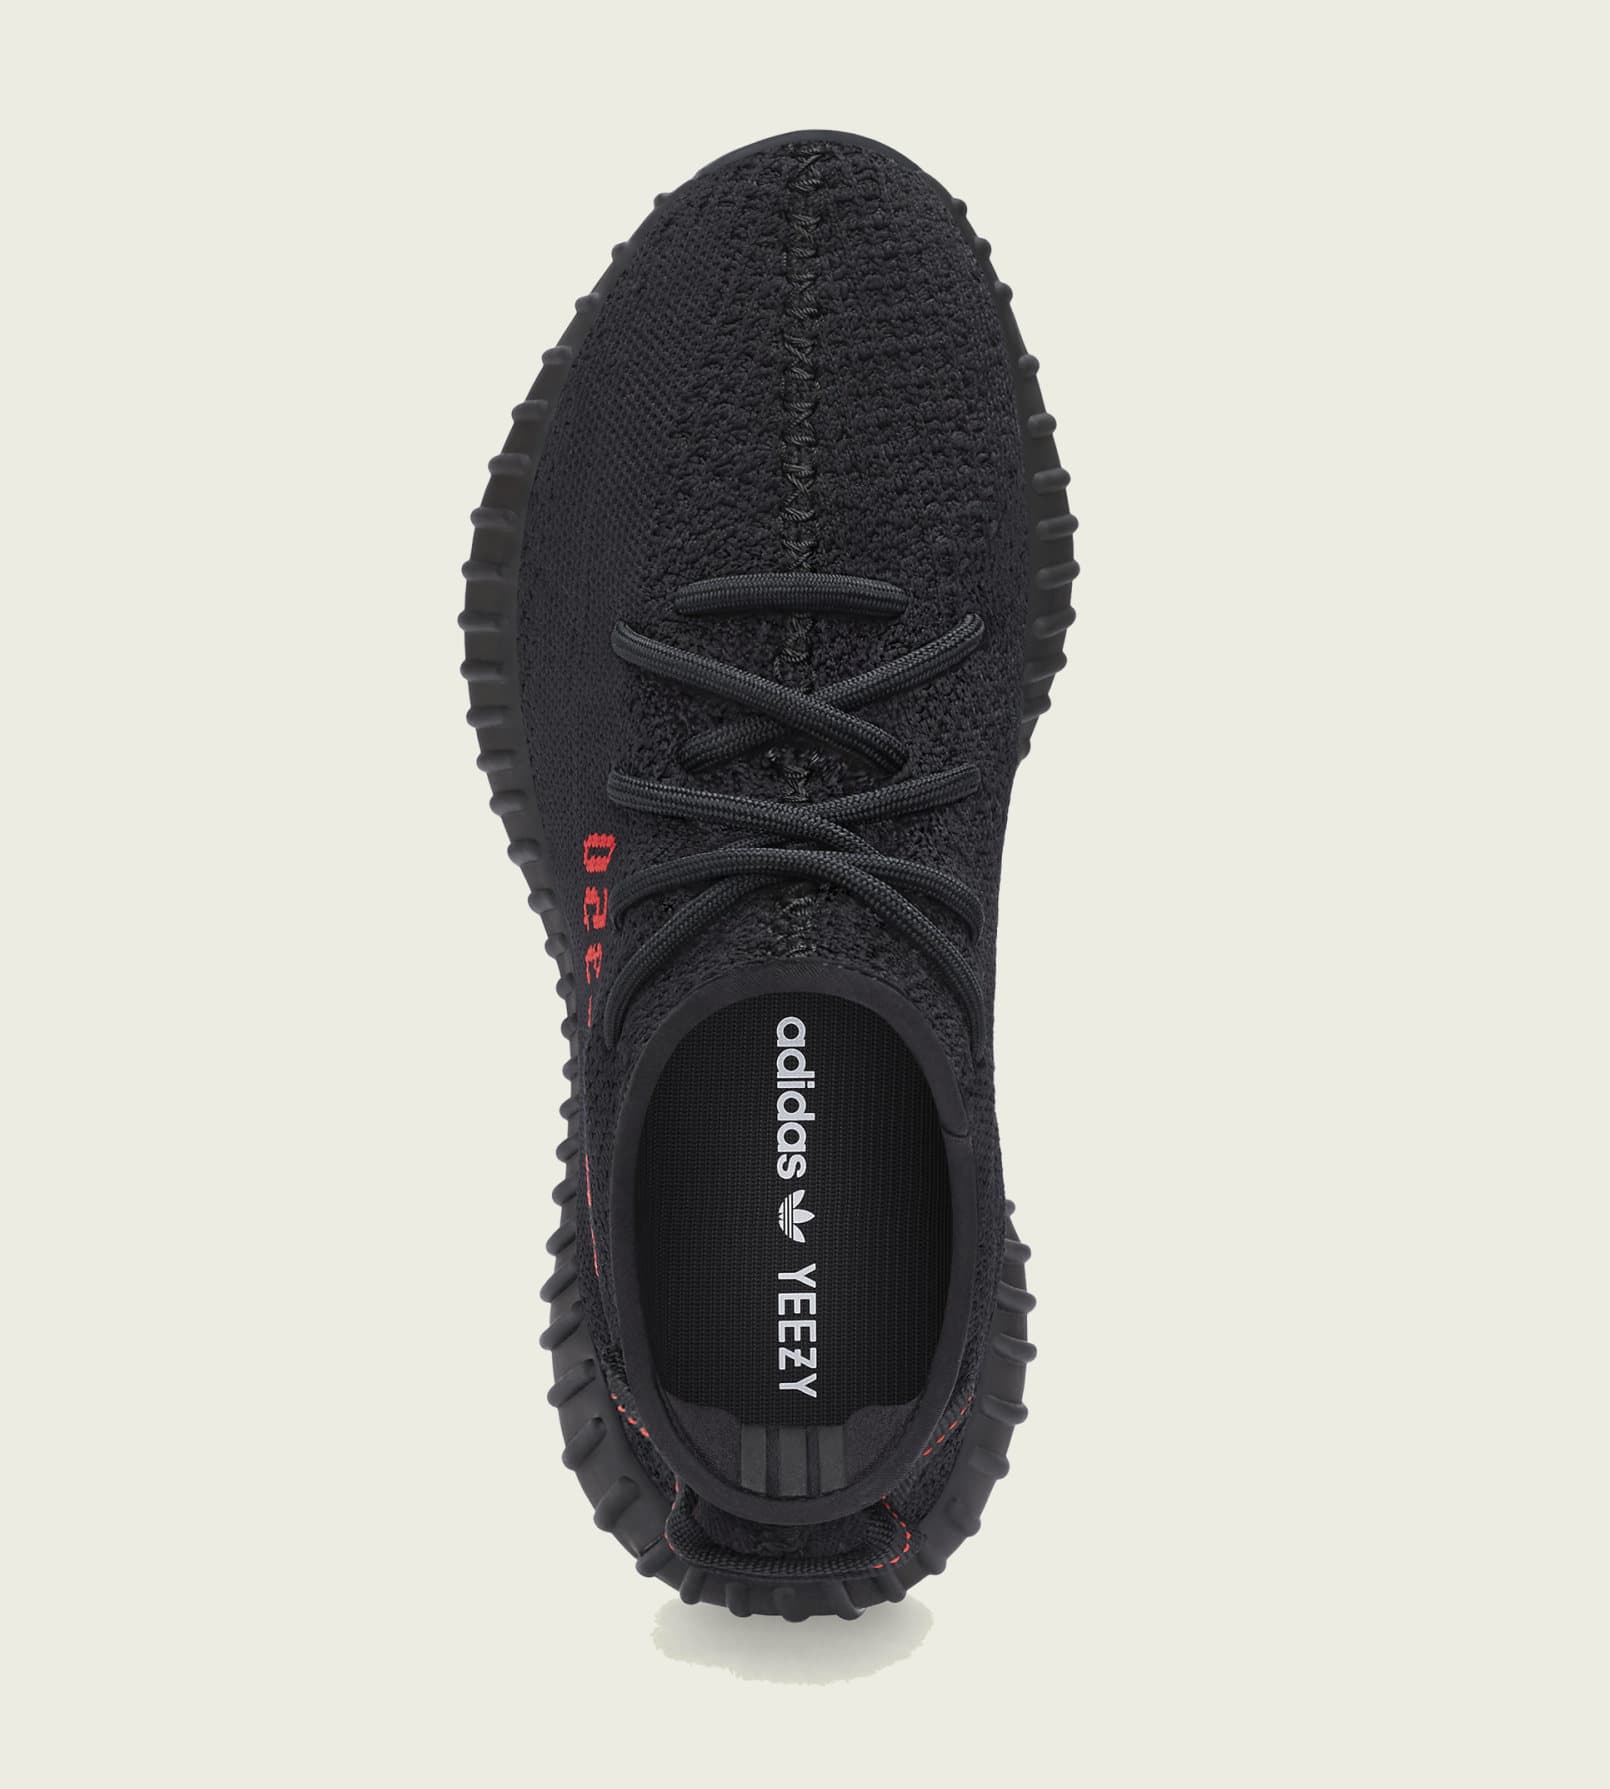 Adidas Yeezy Boost 350 V2 Black/Red CP9652 Top